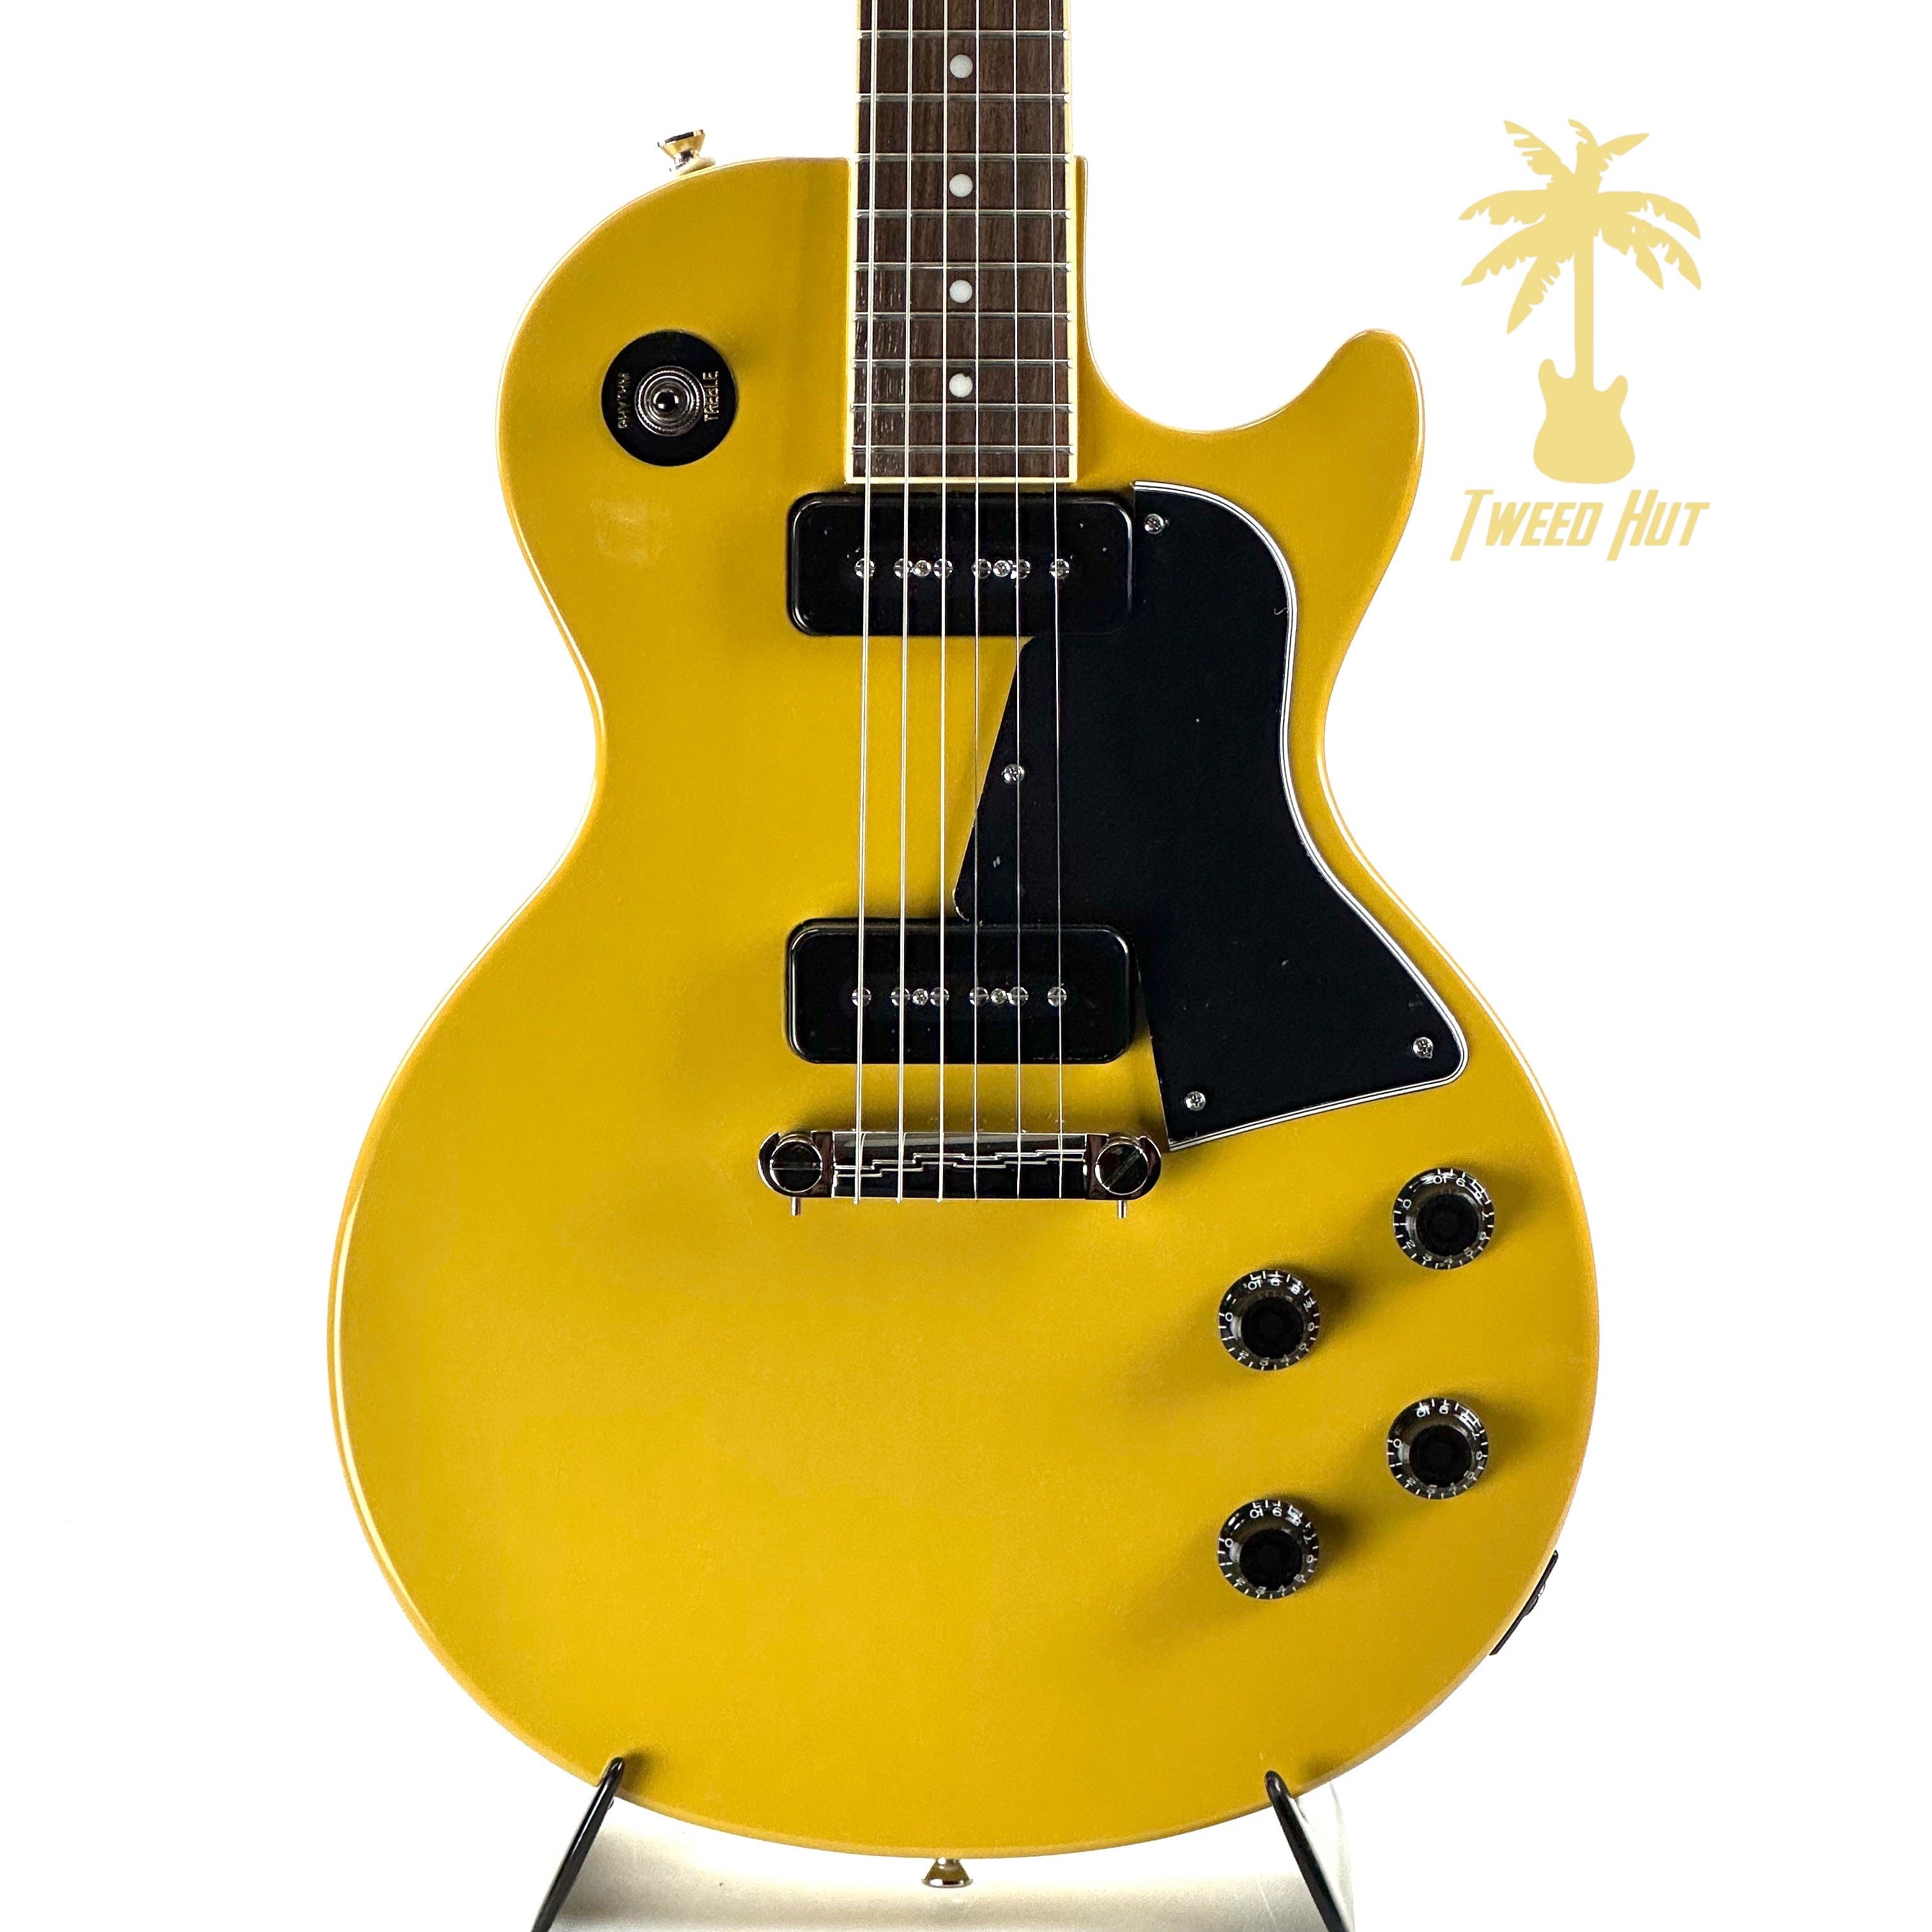 EPIPHONE LES PAUL SPECIAL TV YELLOW